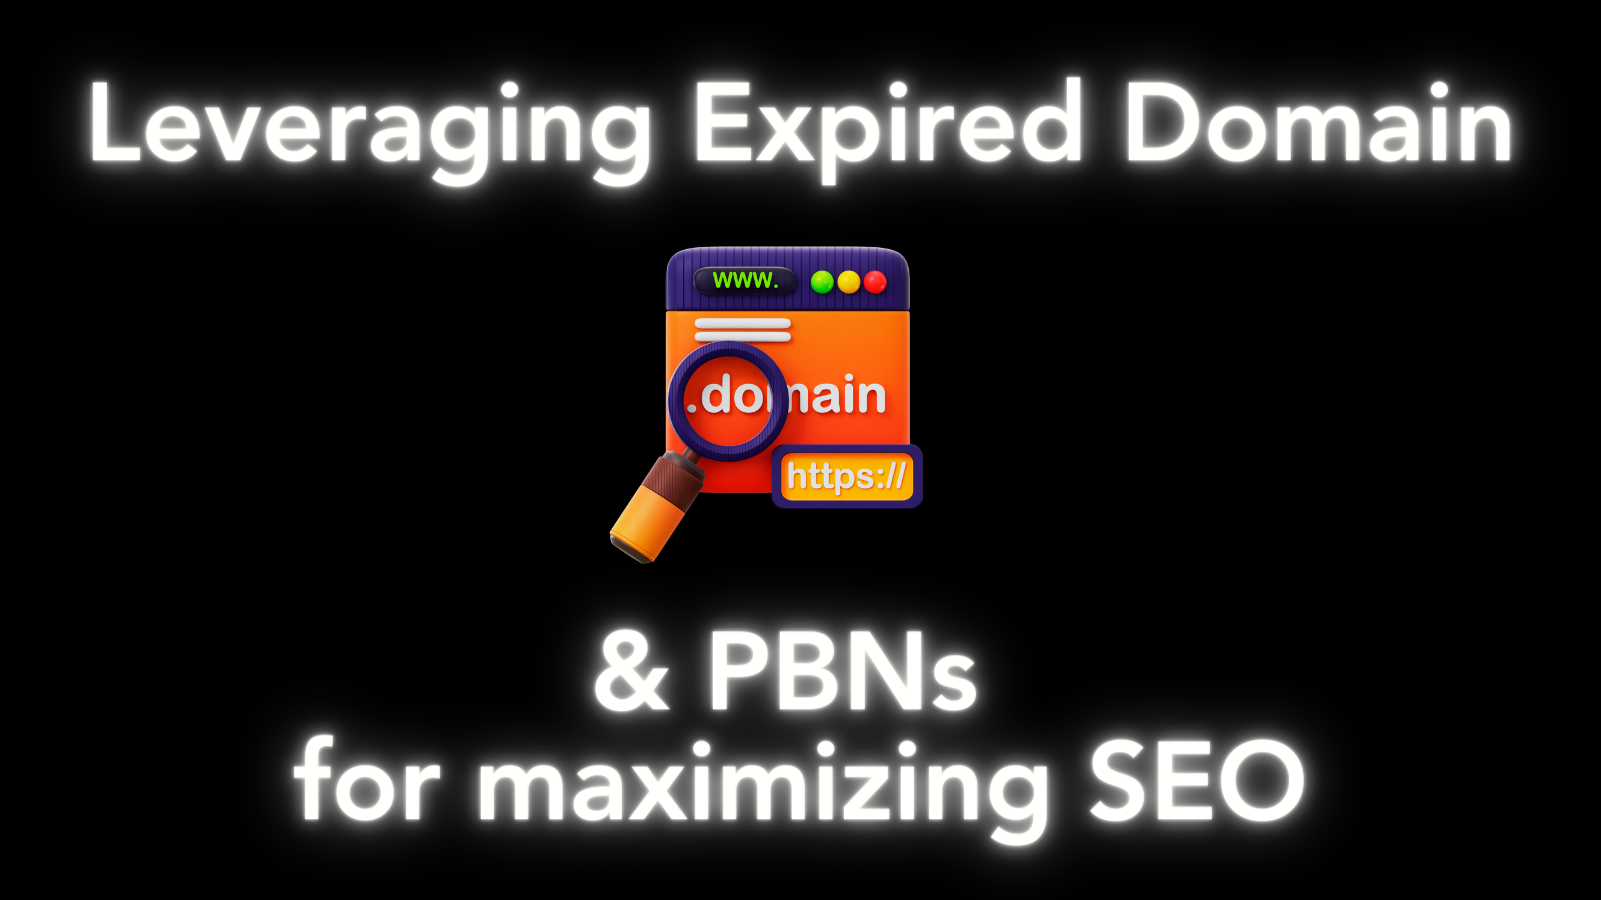 Leveraging Expired Domains and PBNs Maximizing SEO Potential